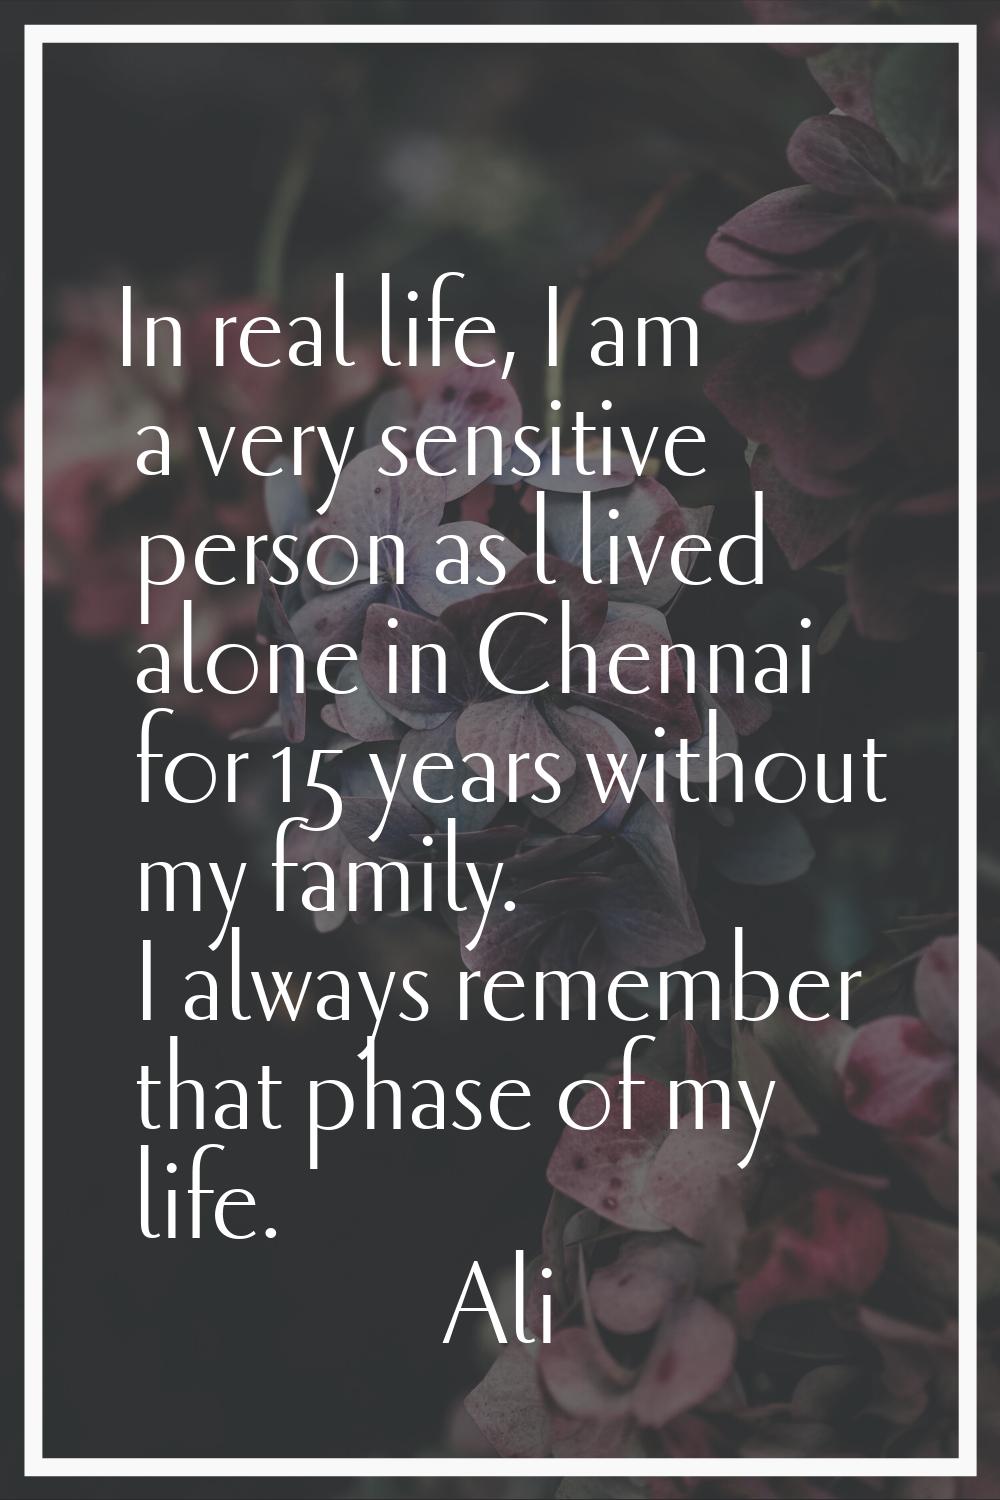 In real life, I am a very sensitive person as l lived alone in Chennai for 15 years without my fami